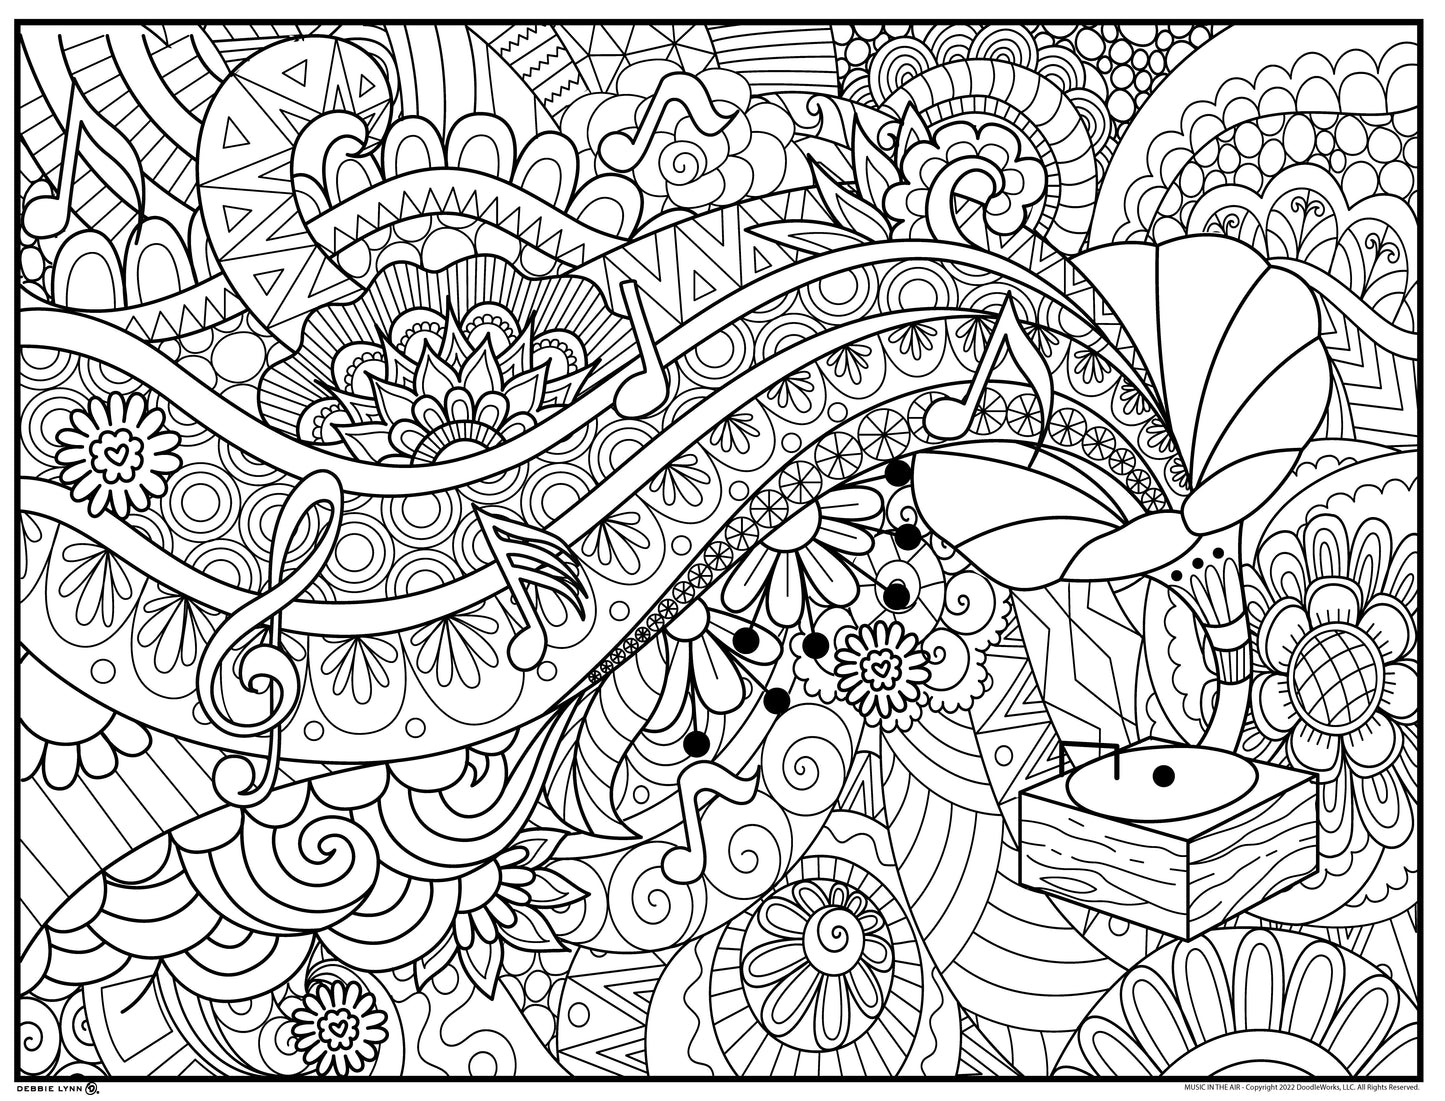 Music In the Air Personalized Giant Coloring Poster 46"x60"